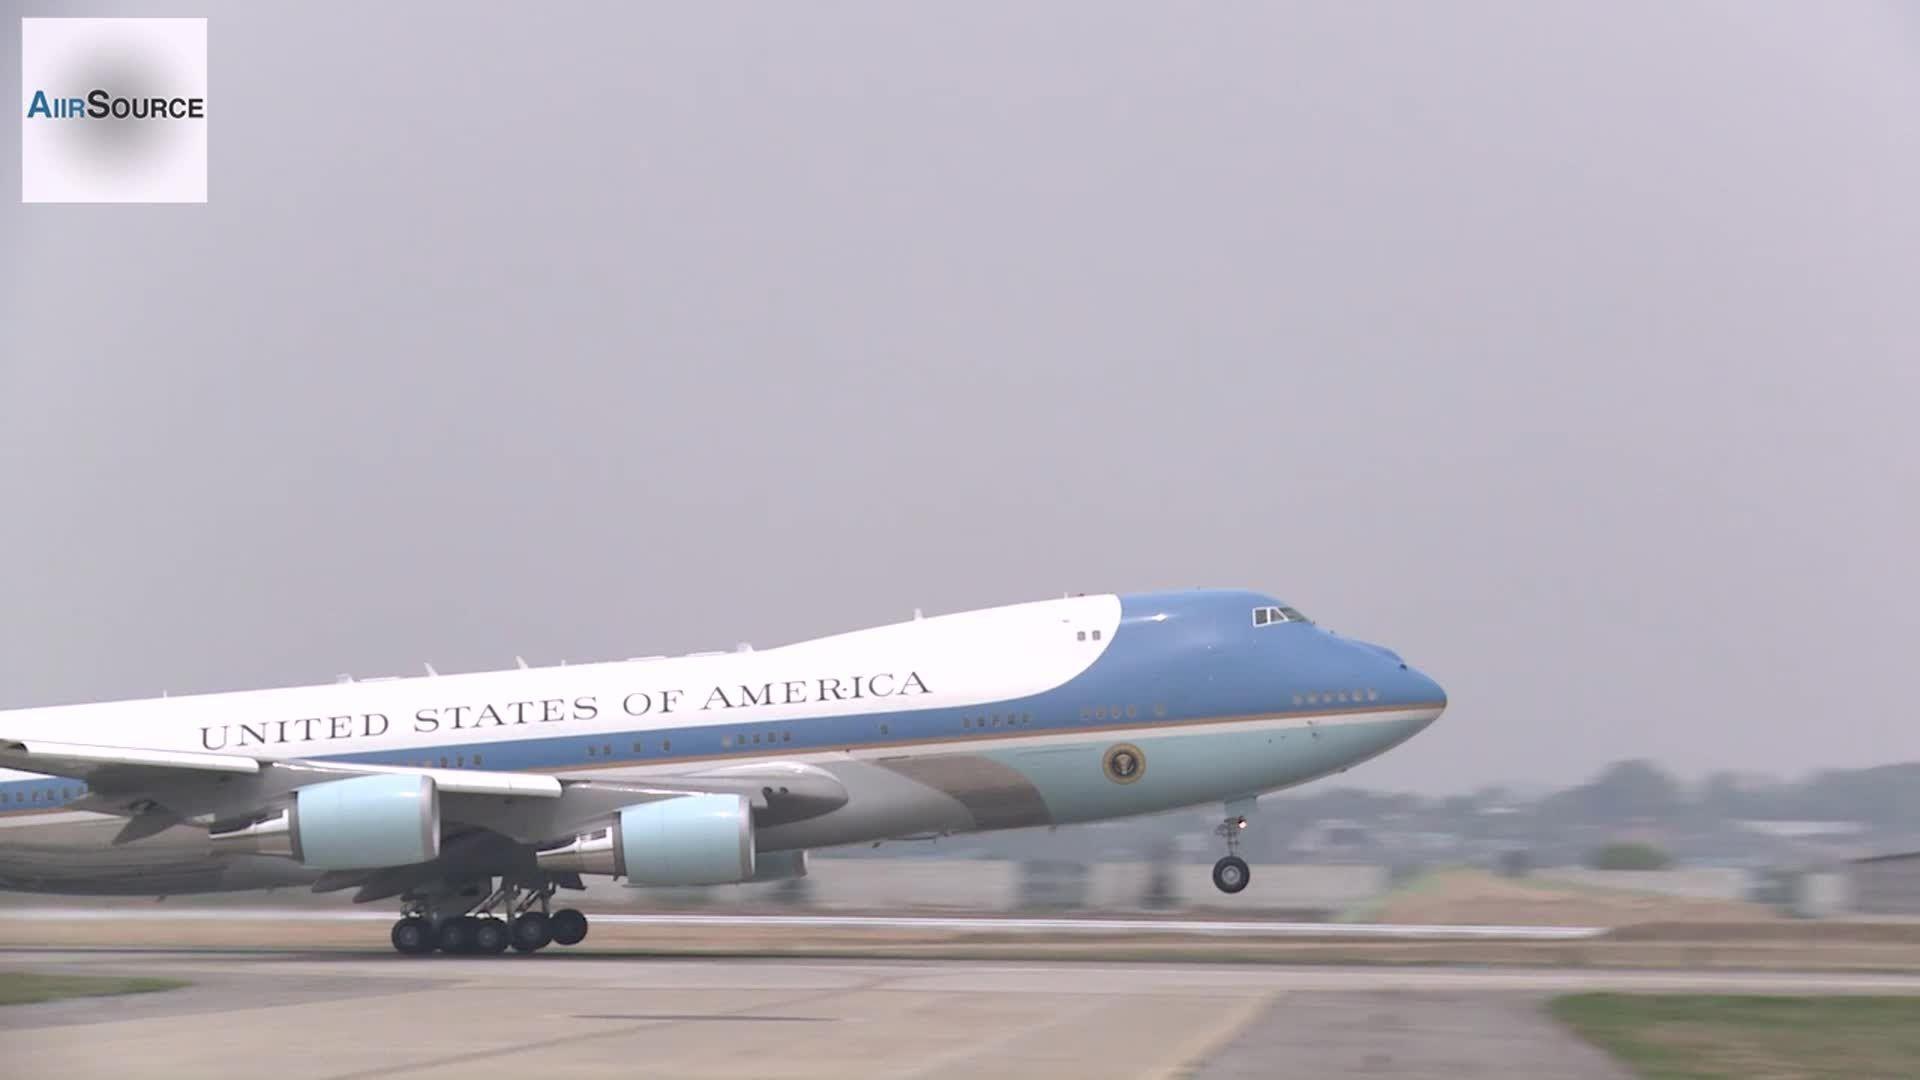 Air Force One Boeing 747 Takes Off At Osan Air Base, Korea